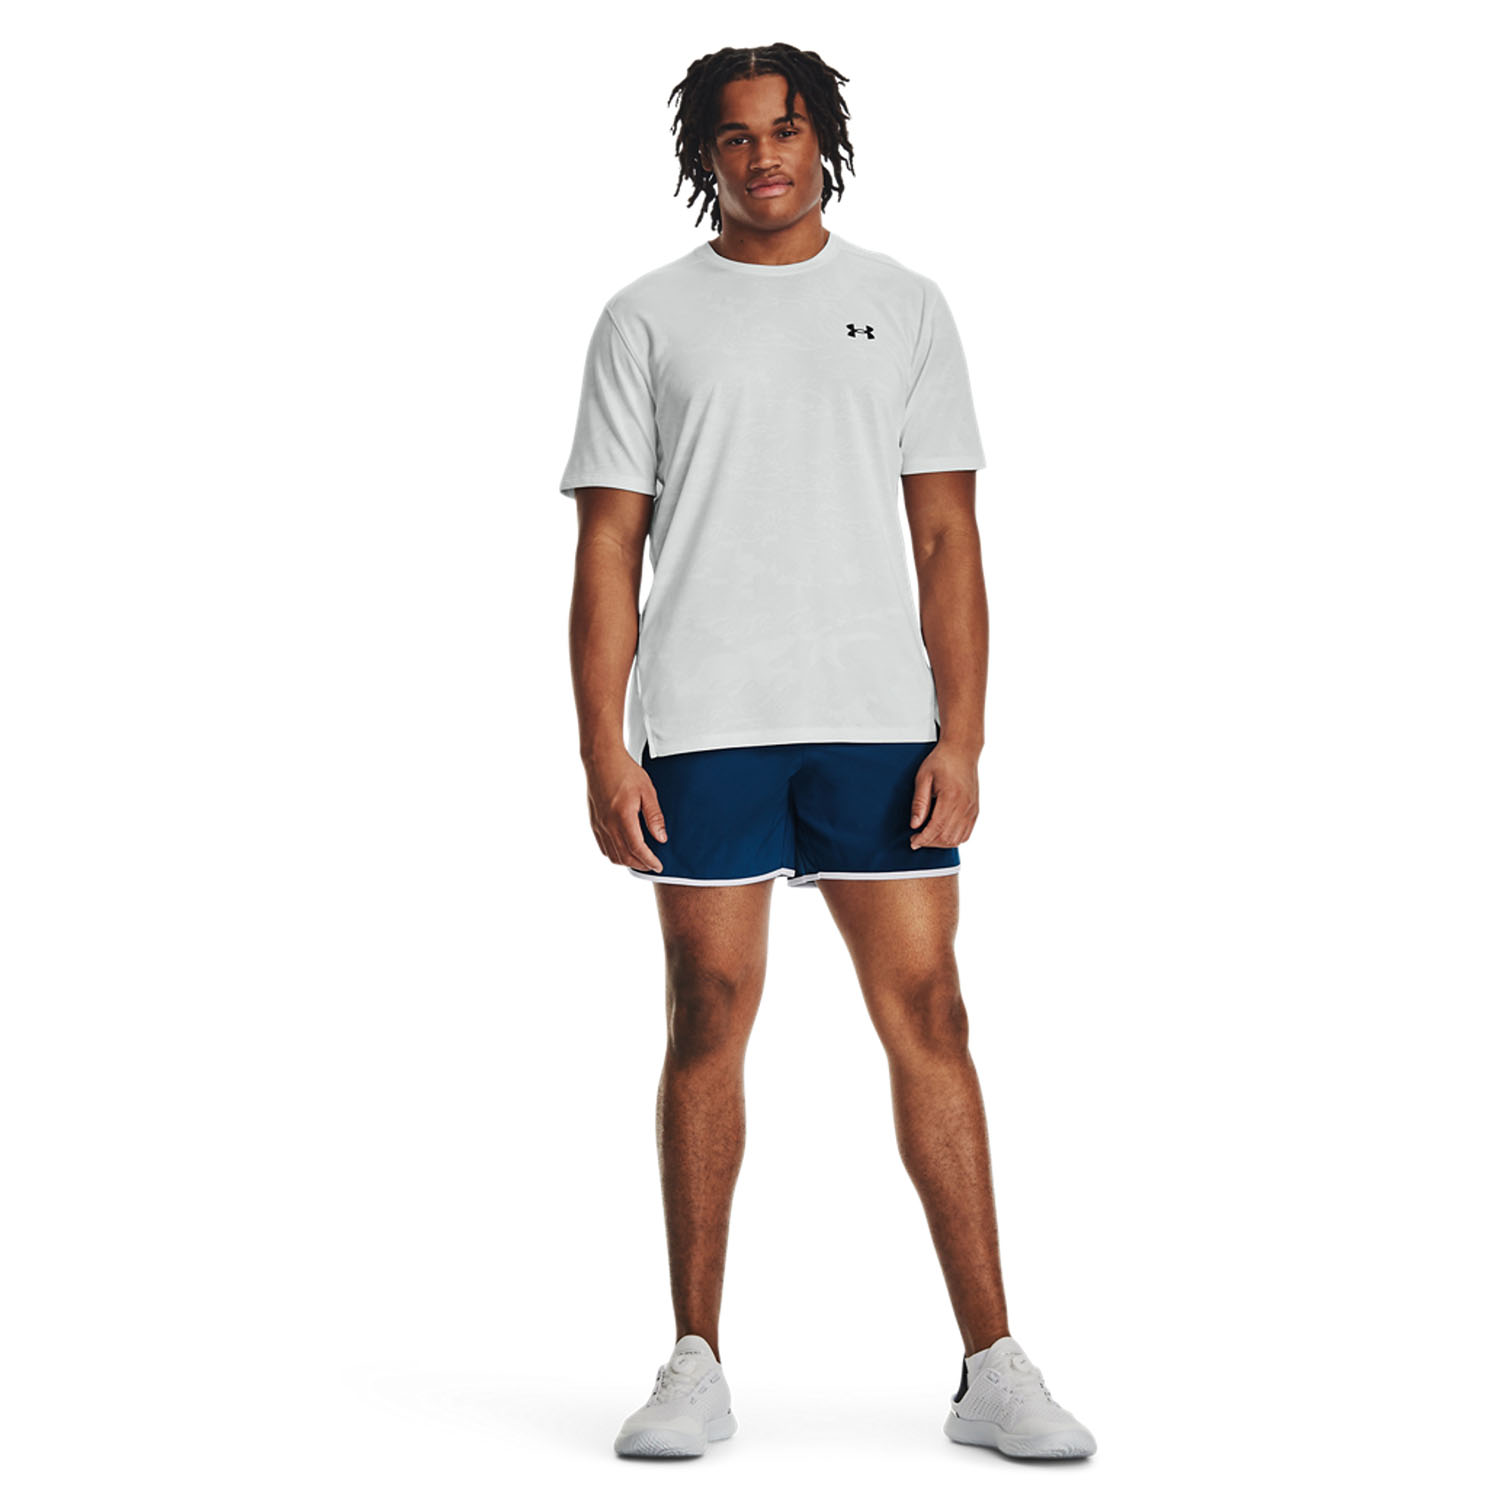 Under Armour HIIT Woven 6in Shorts - Varsity Blue